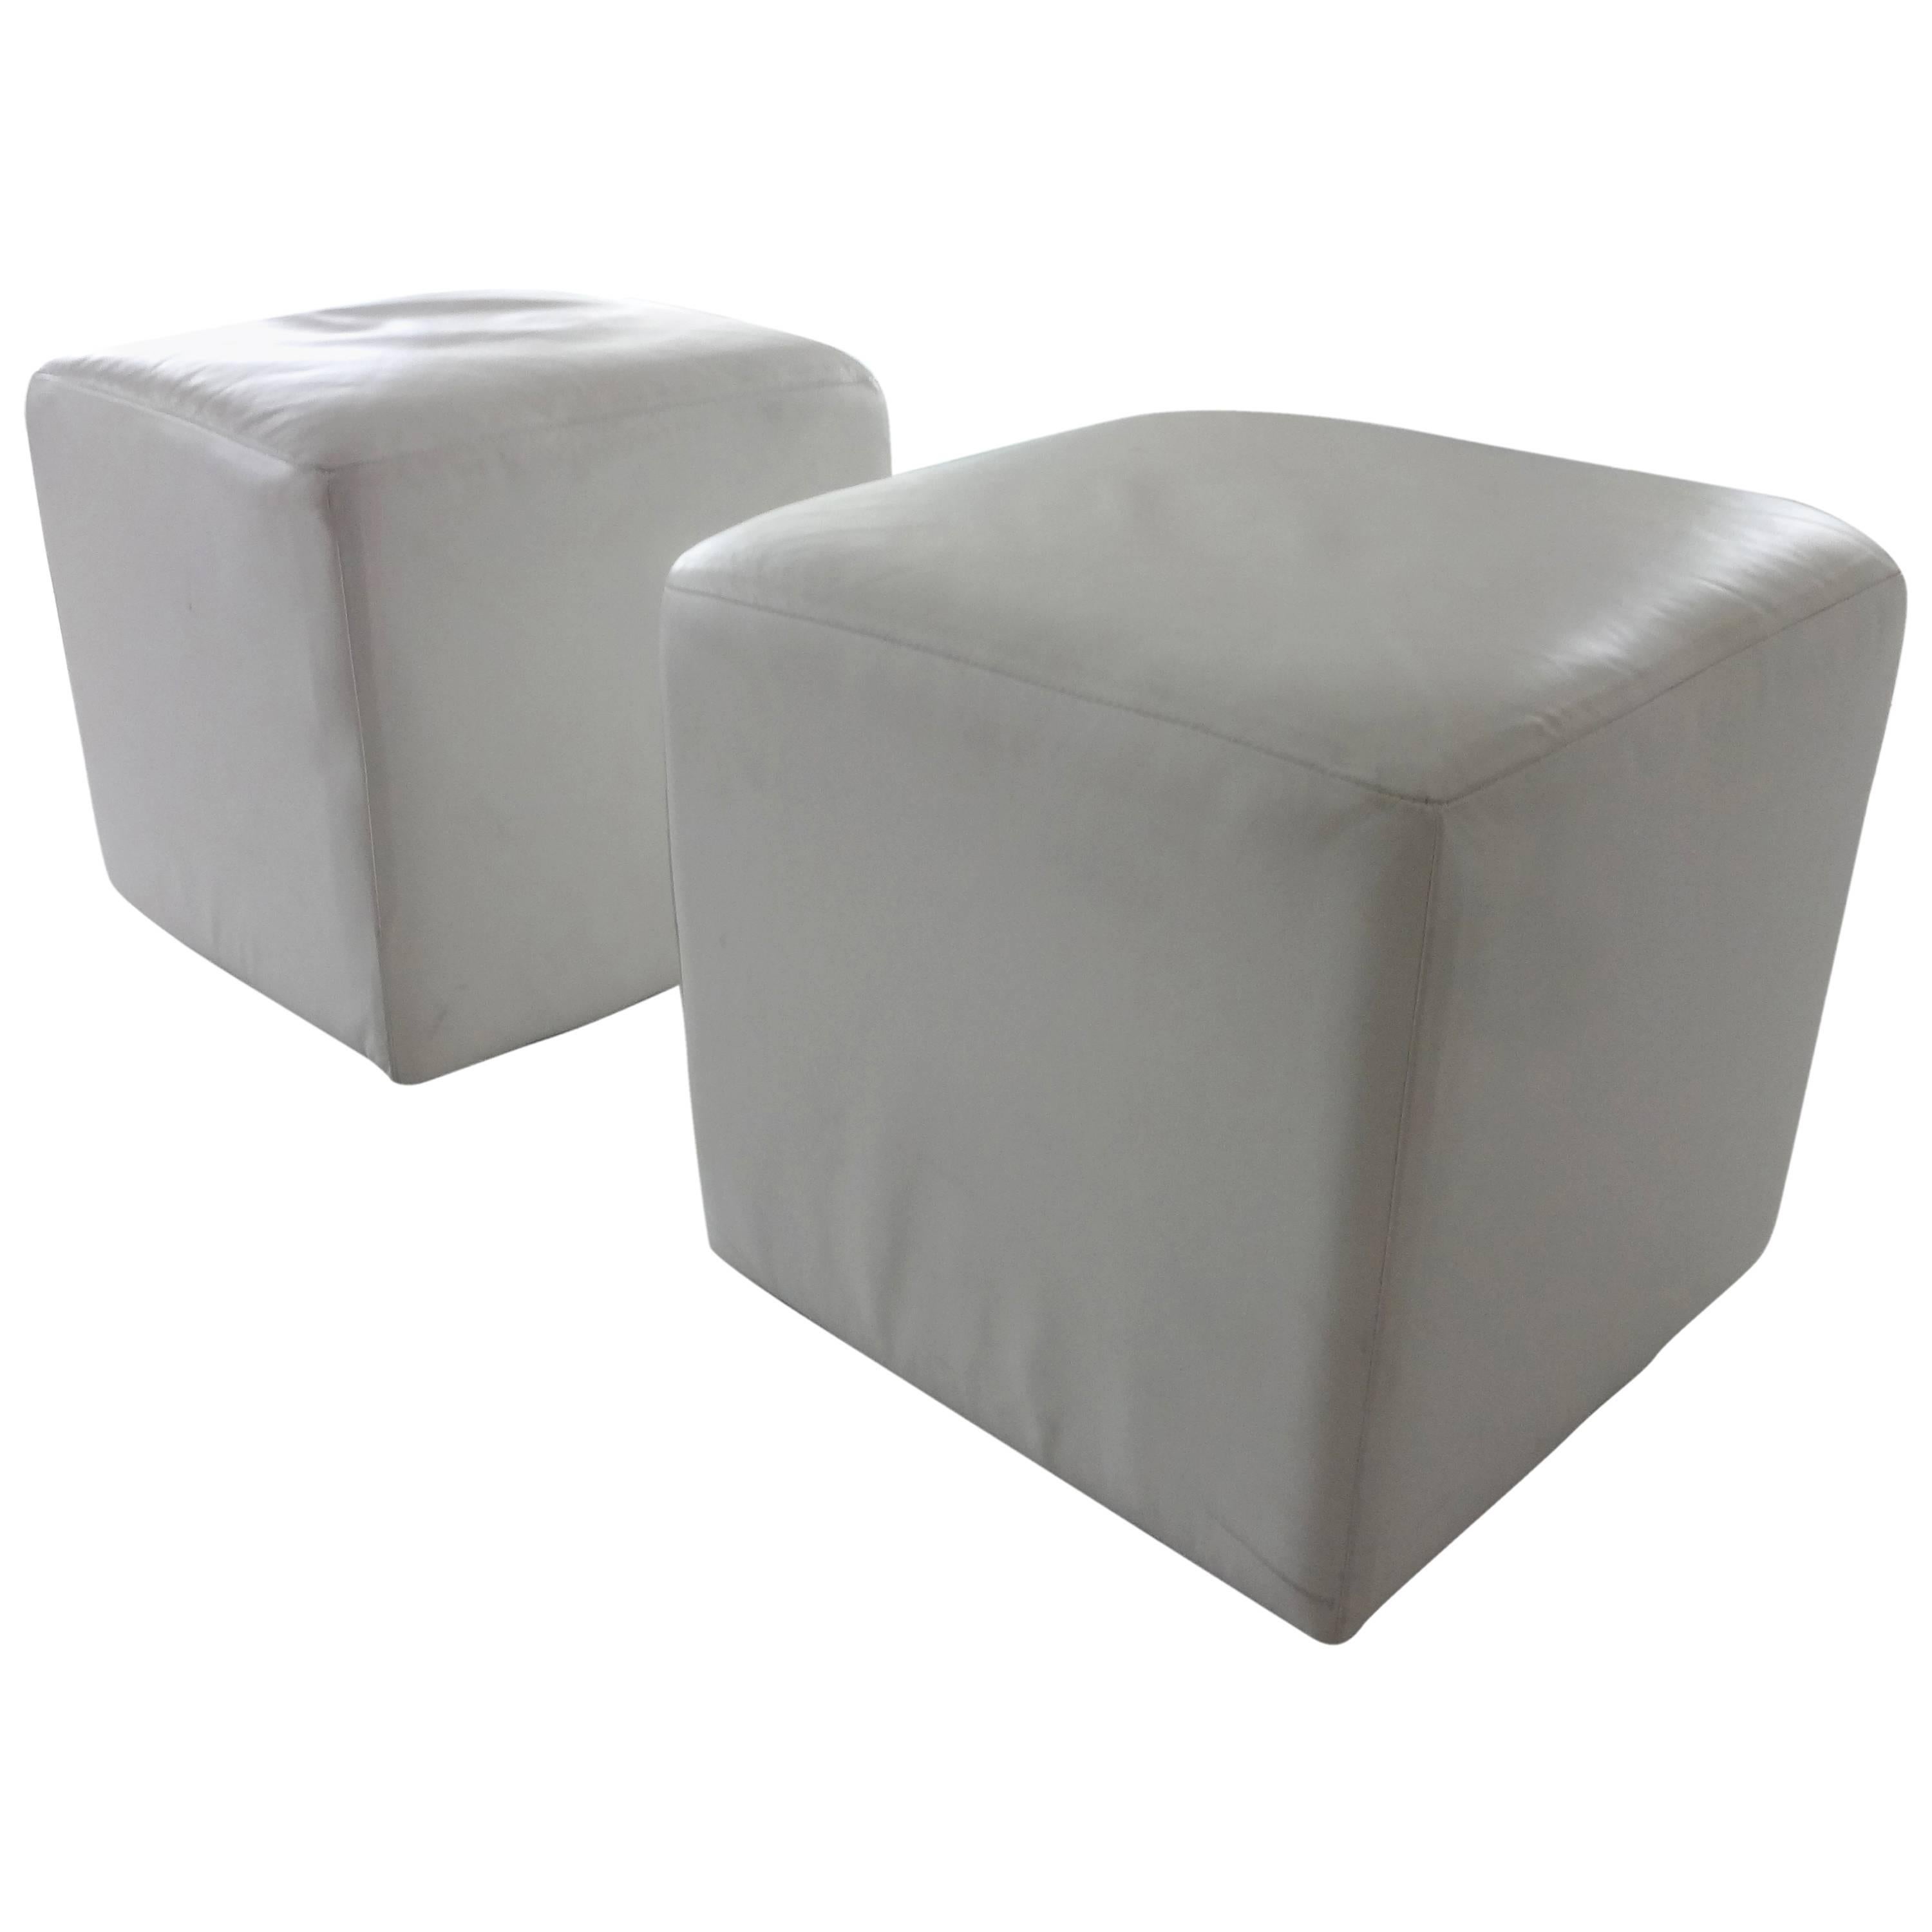 Pair of Roche Bobois White Leather Cubes